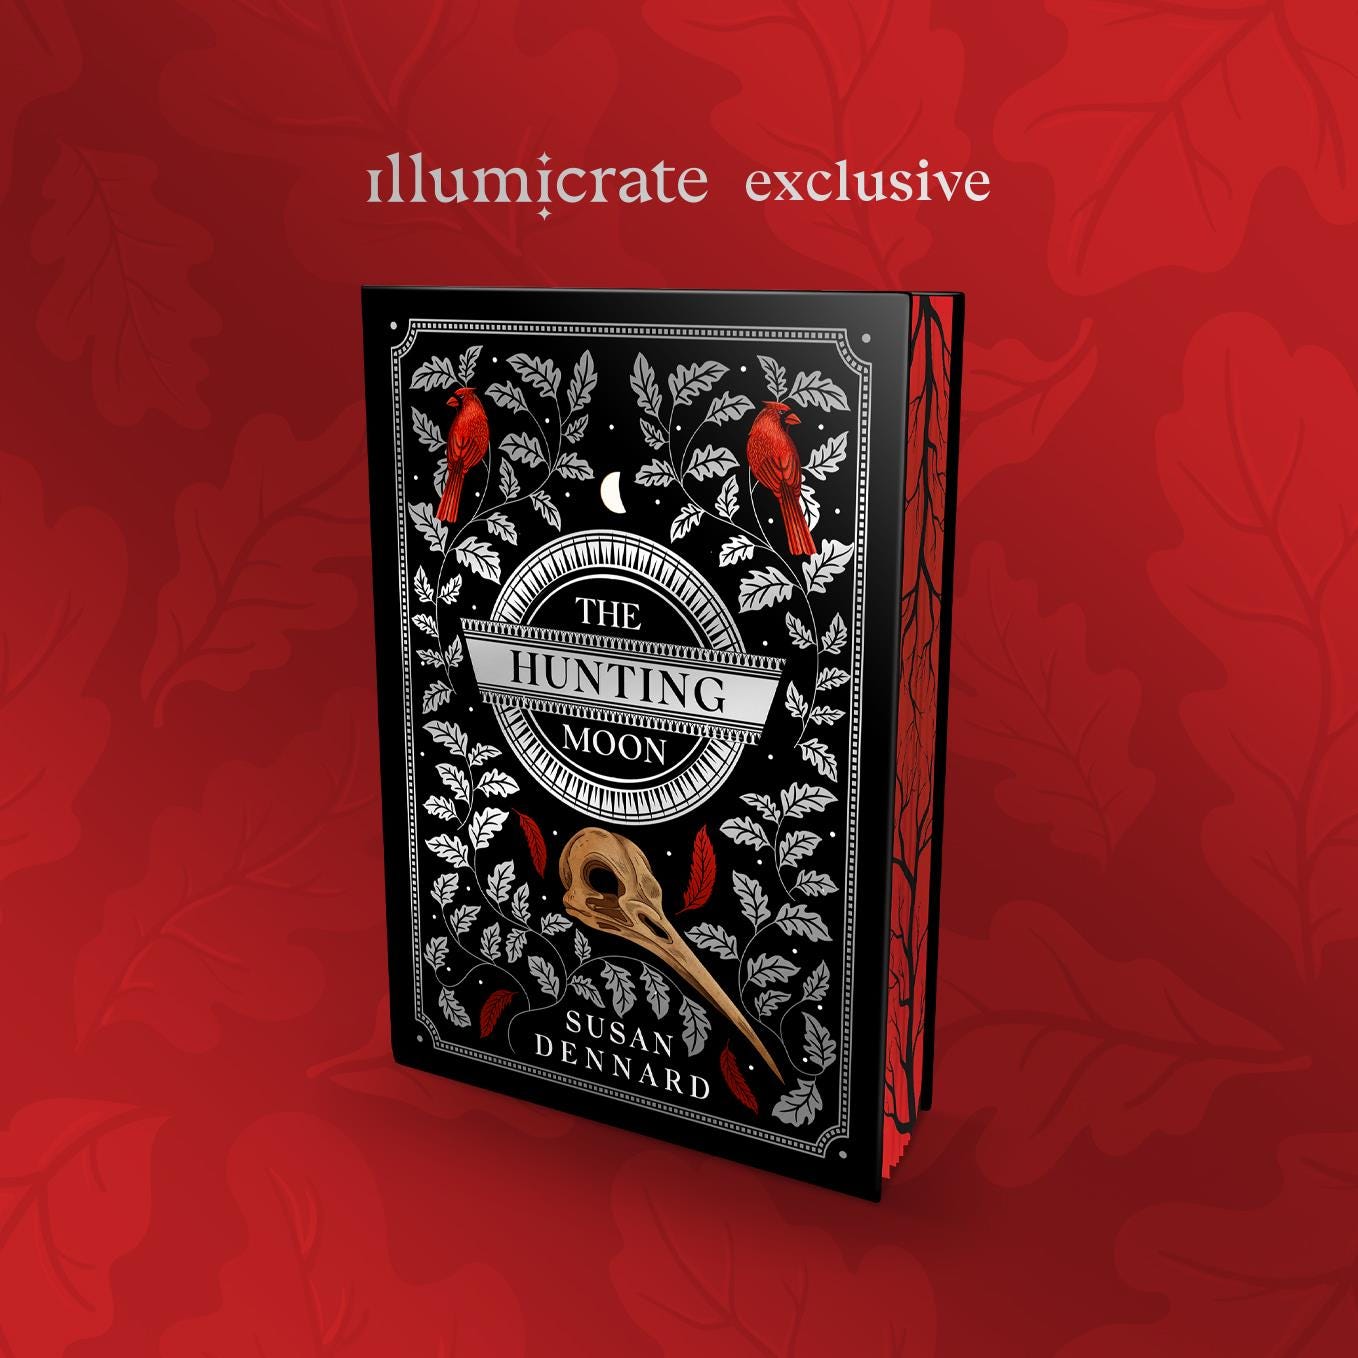 A graphic showing the Illumicrate edition of The Hunting Moon with silver leaves and a hummingbird skull